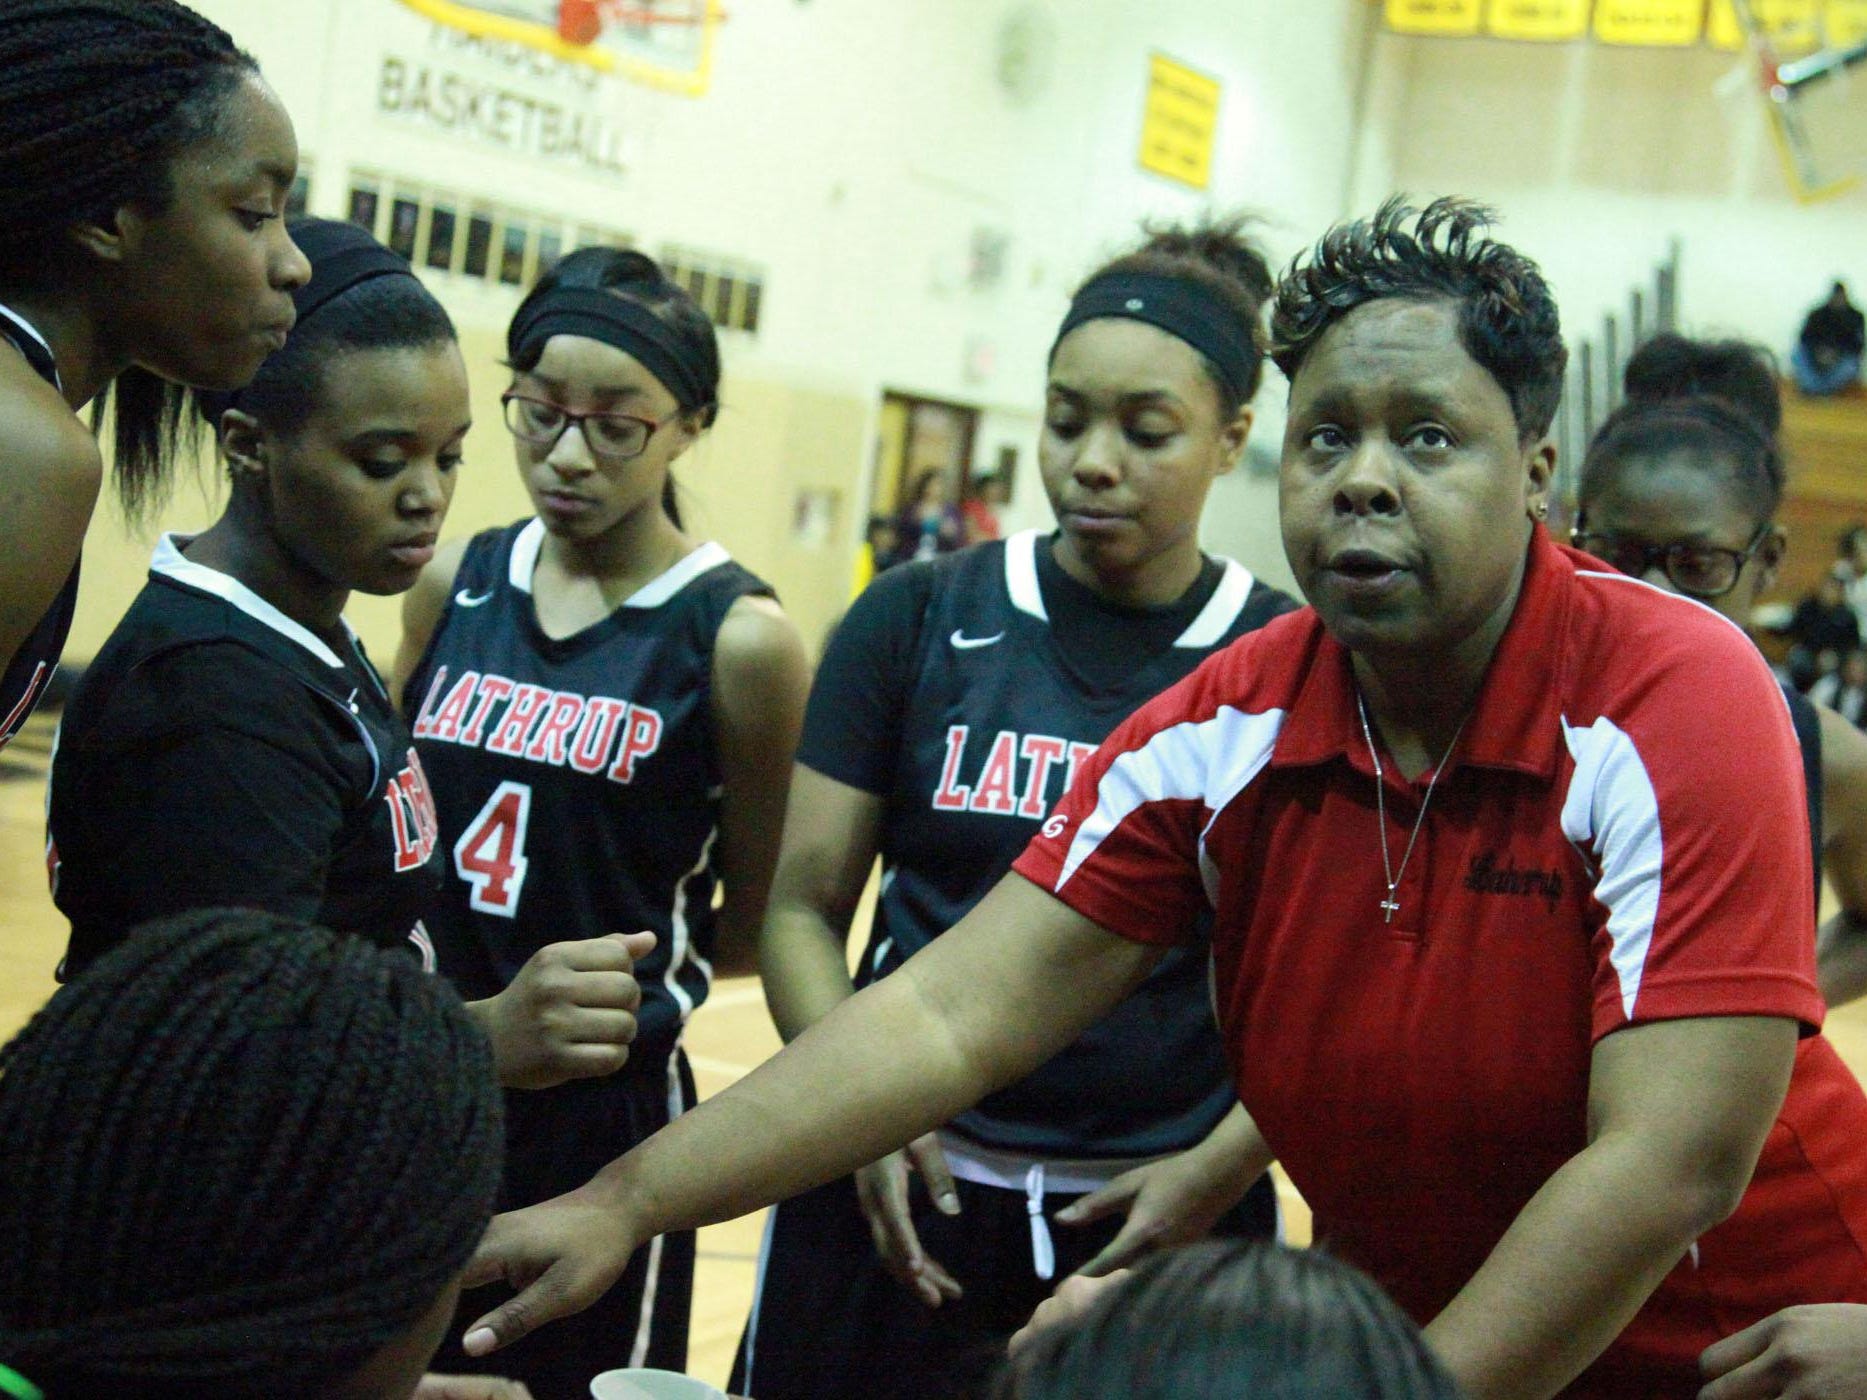 Lathrup coach Michele Marshall has words of advice for her players during a timeout.